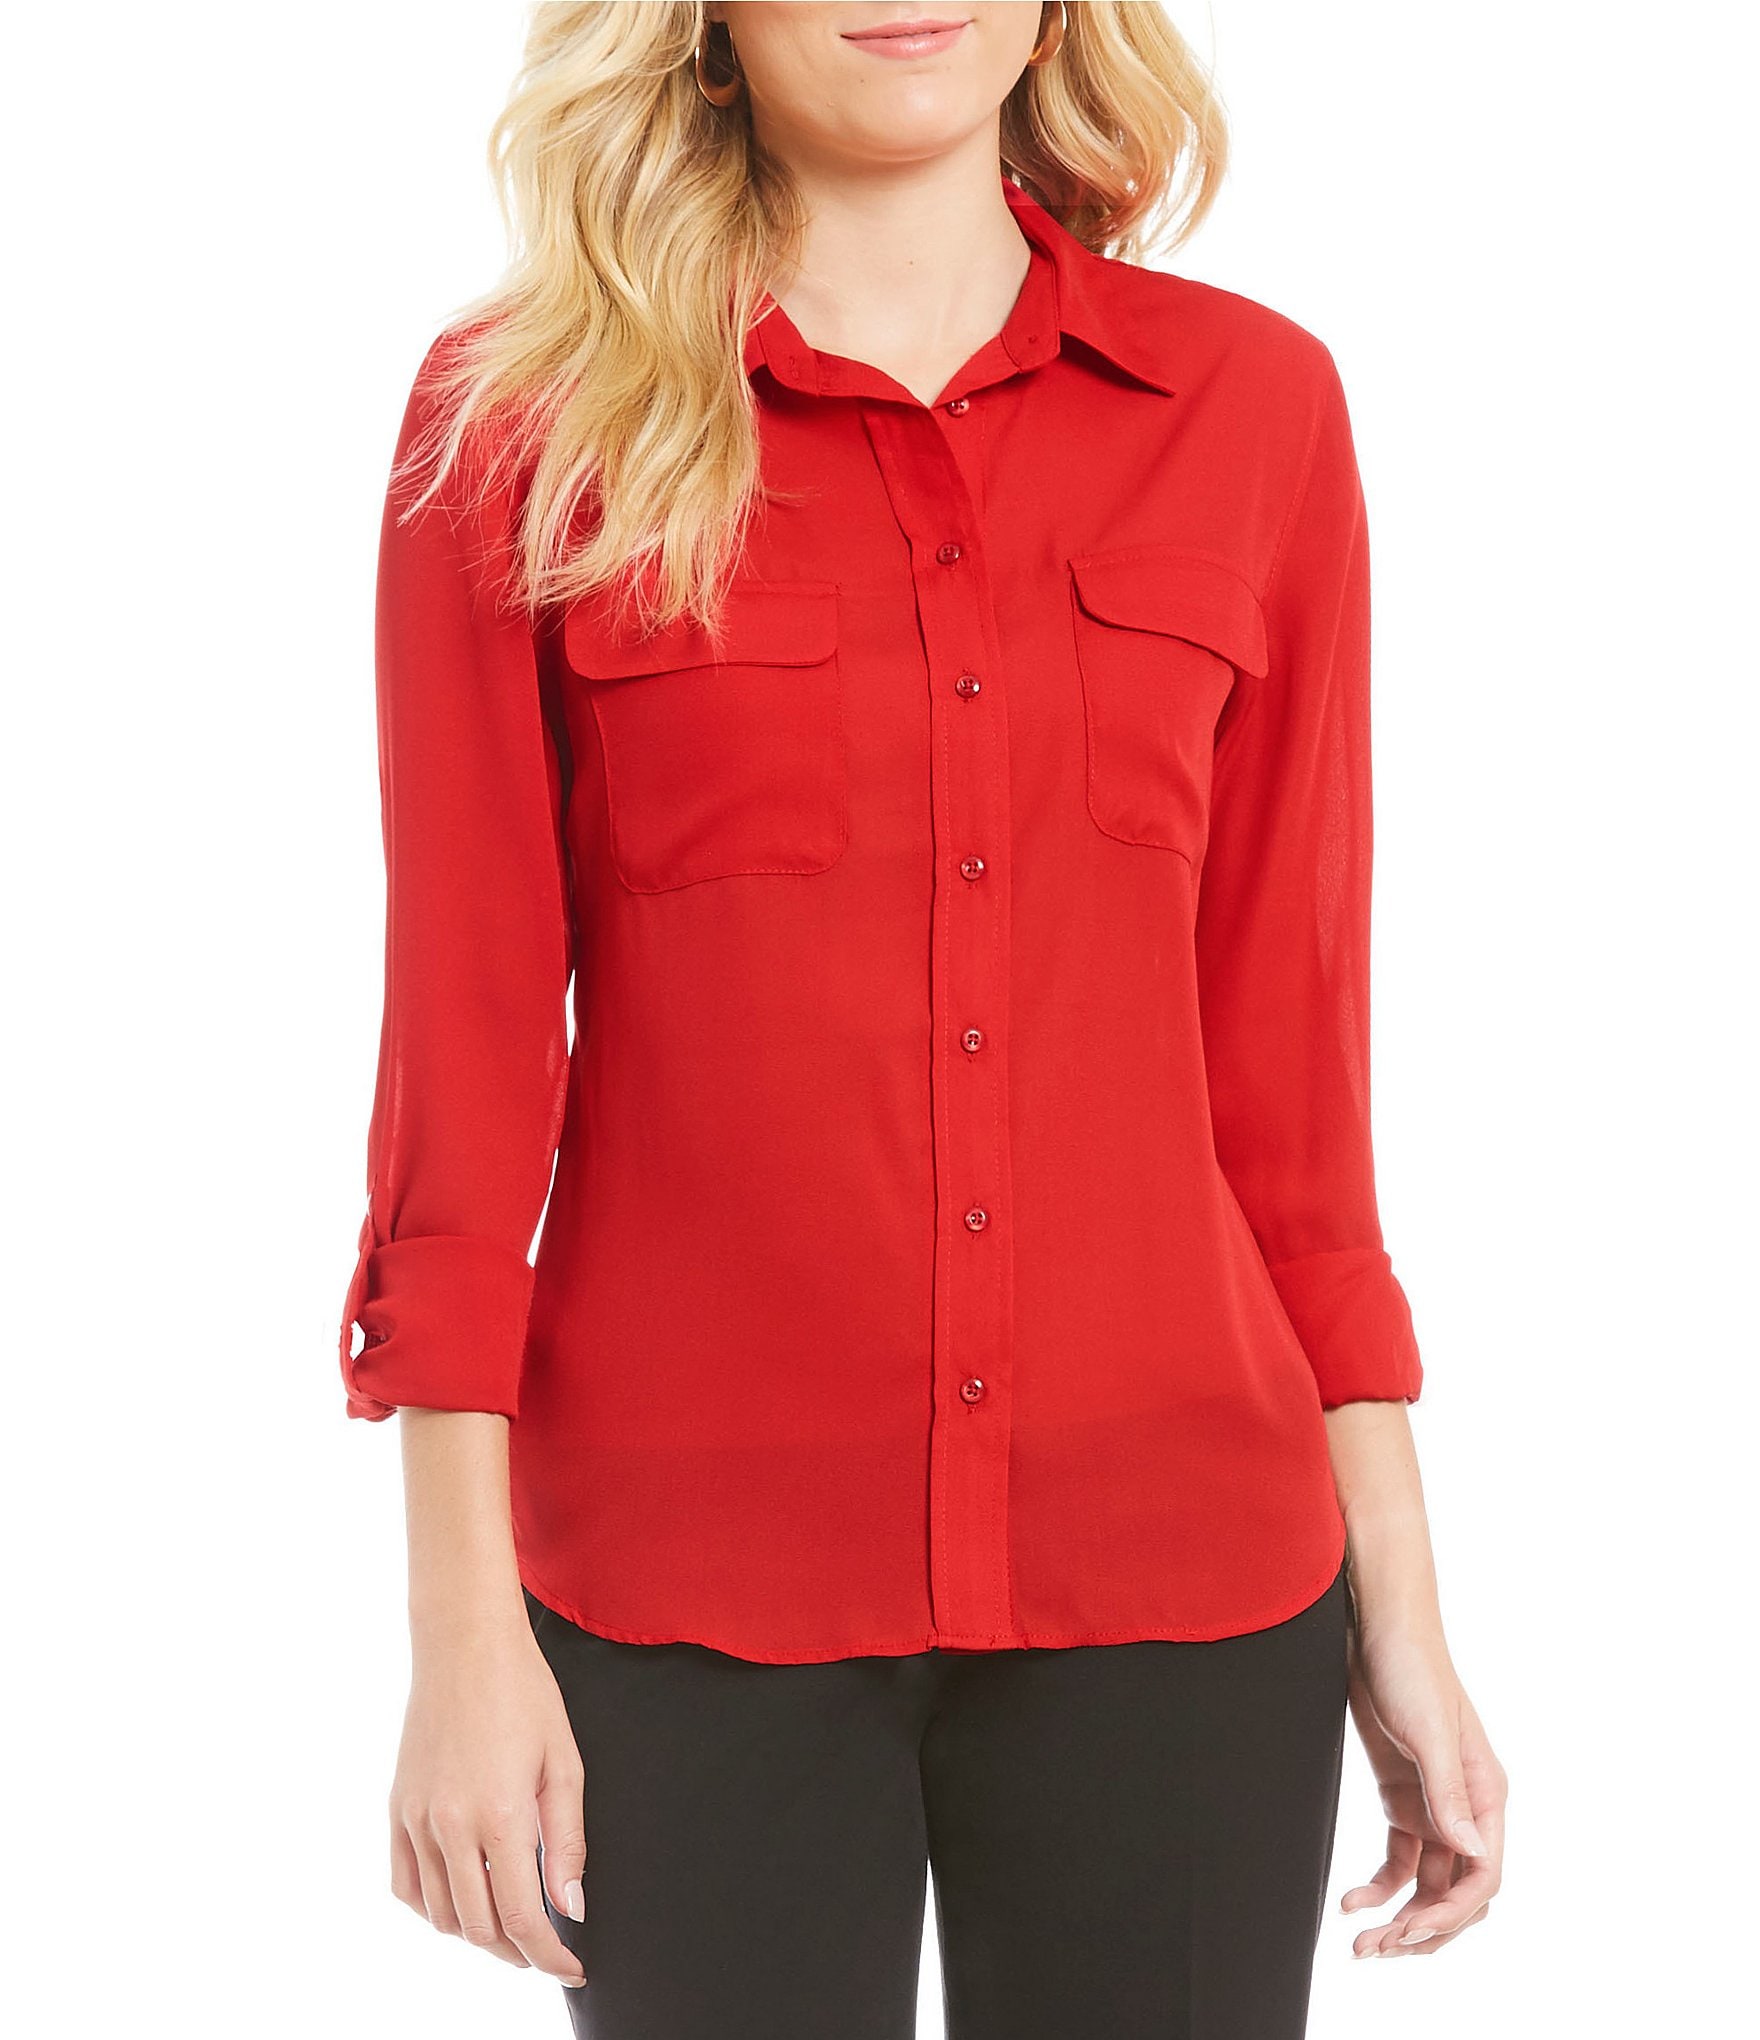 dillards tops and blouses